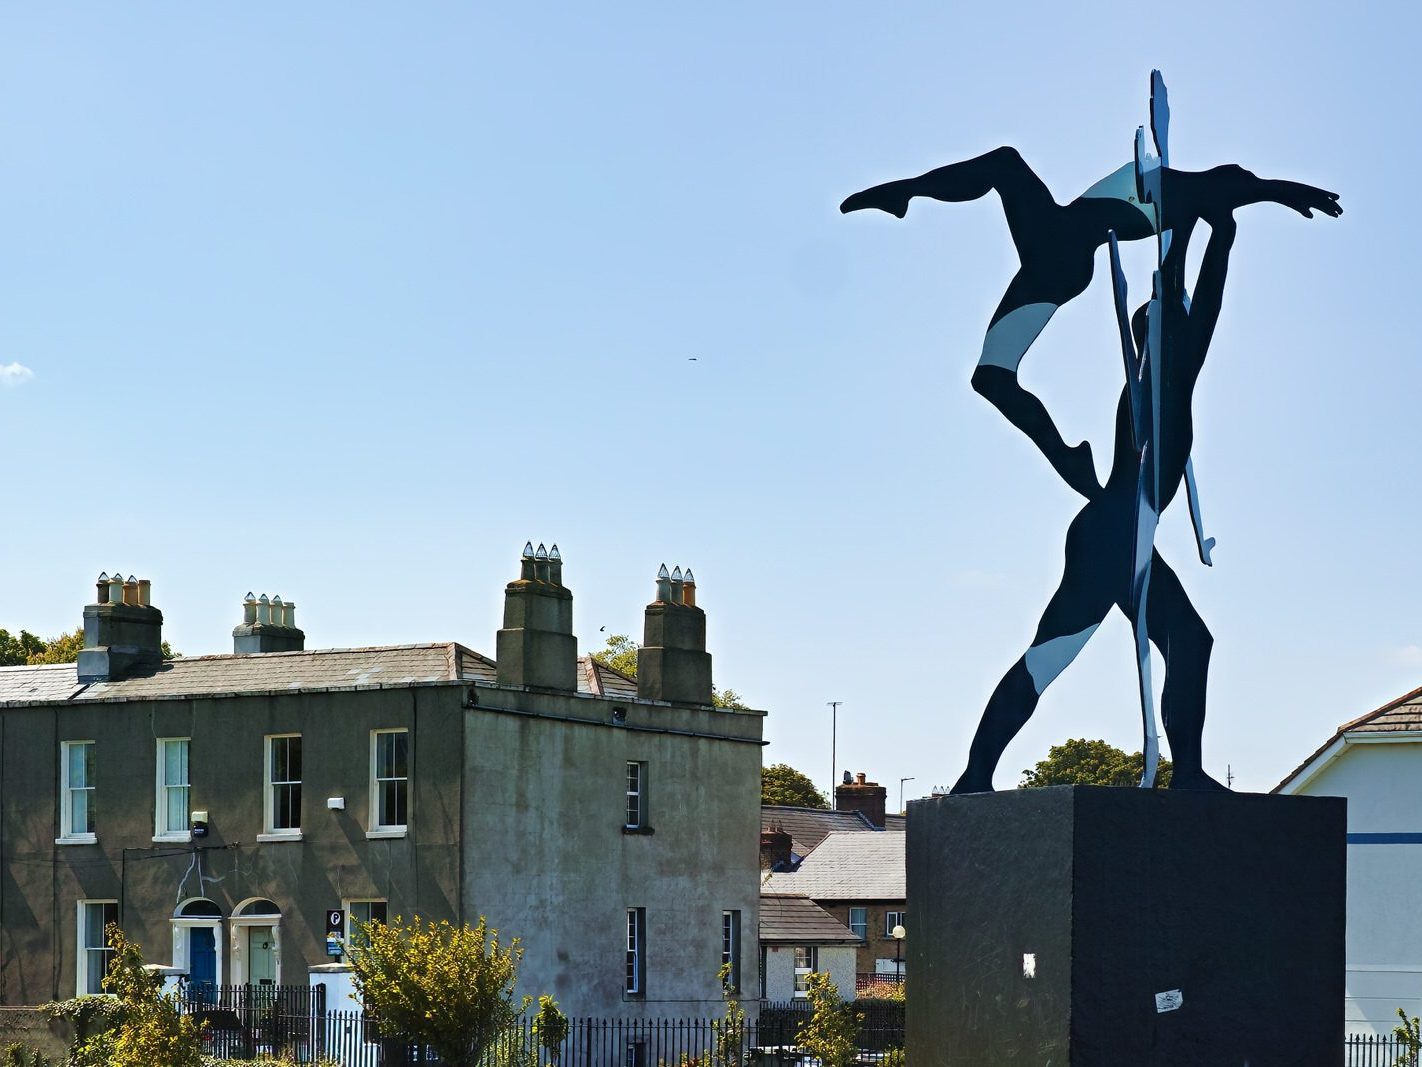 DANNY MacCARTHY'S CUT OUT PEOPLE [THIS SCULPTURE CAN BE FOUND IN BLACKROCK PARK] 001